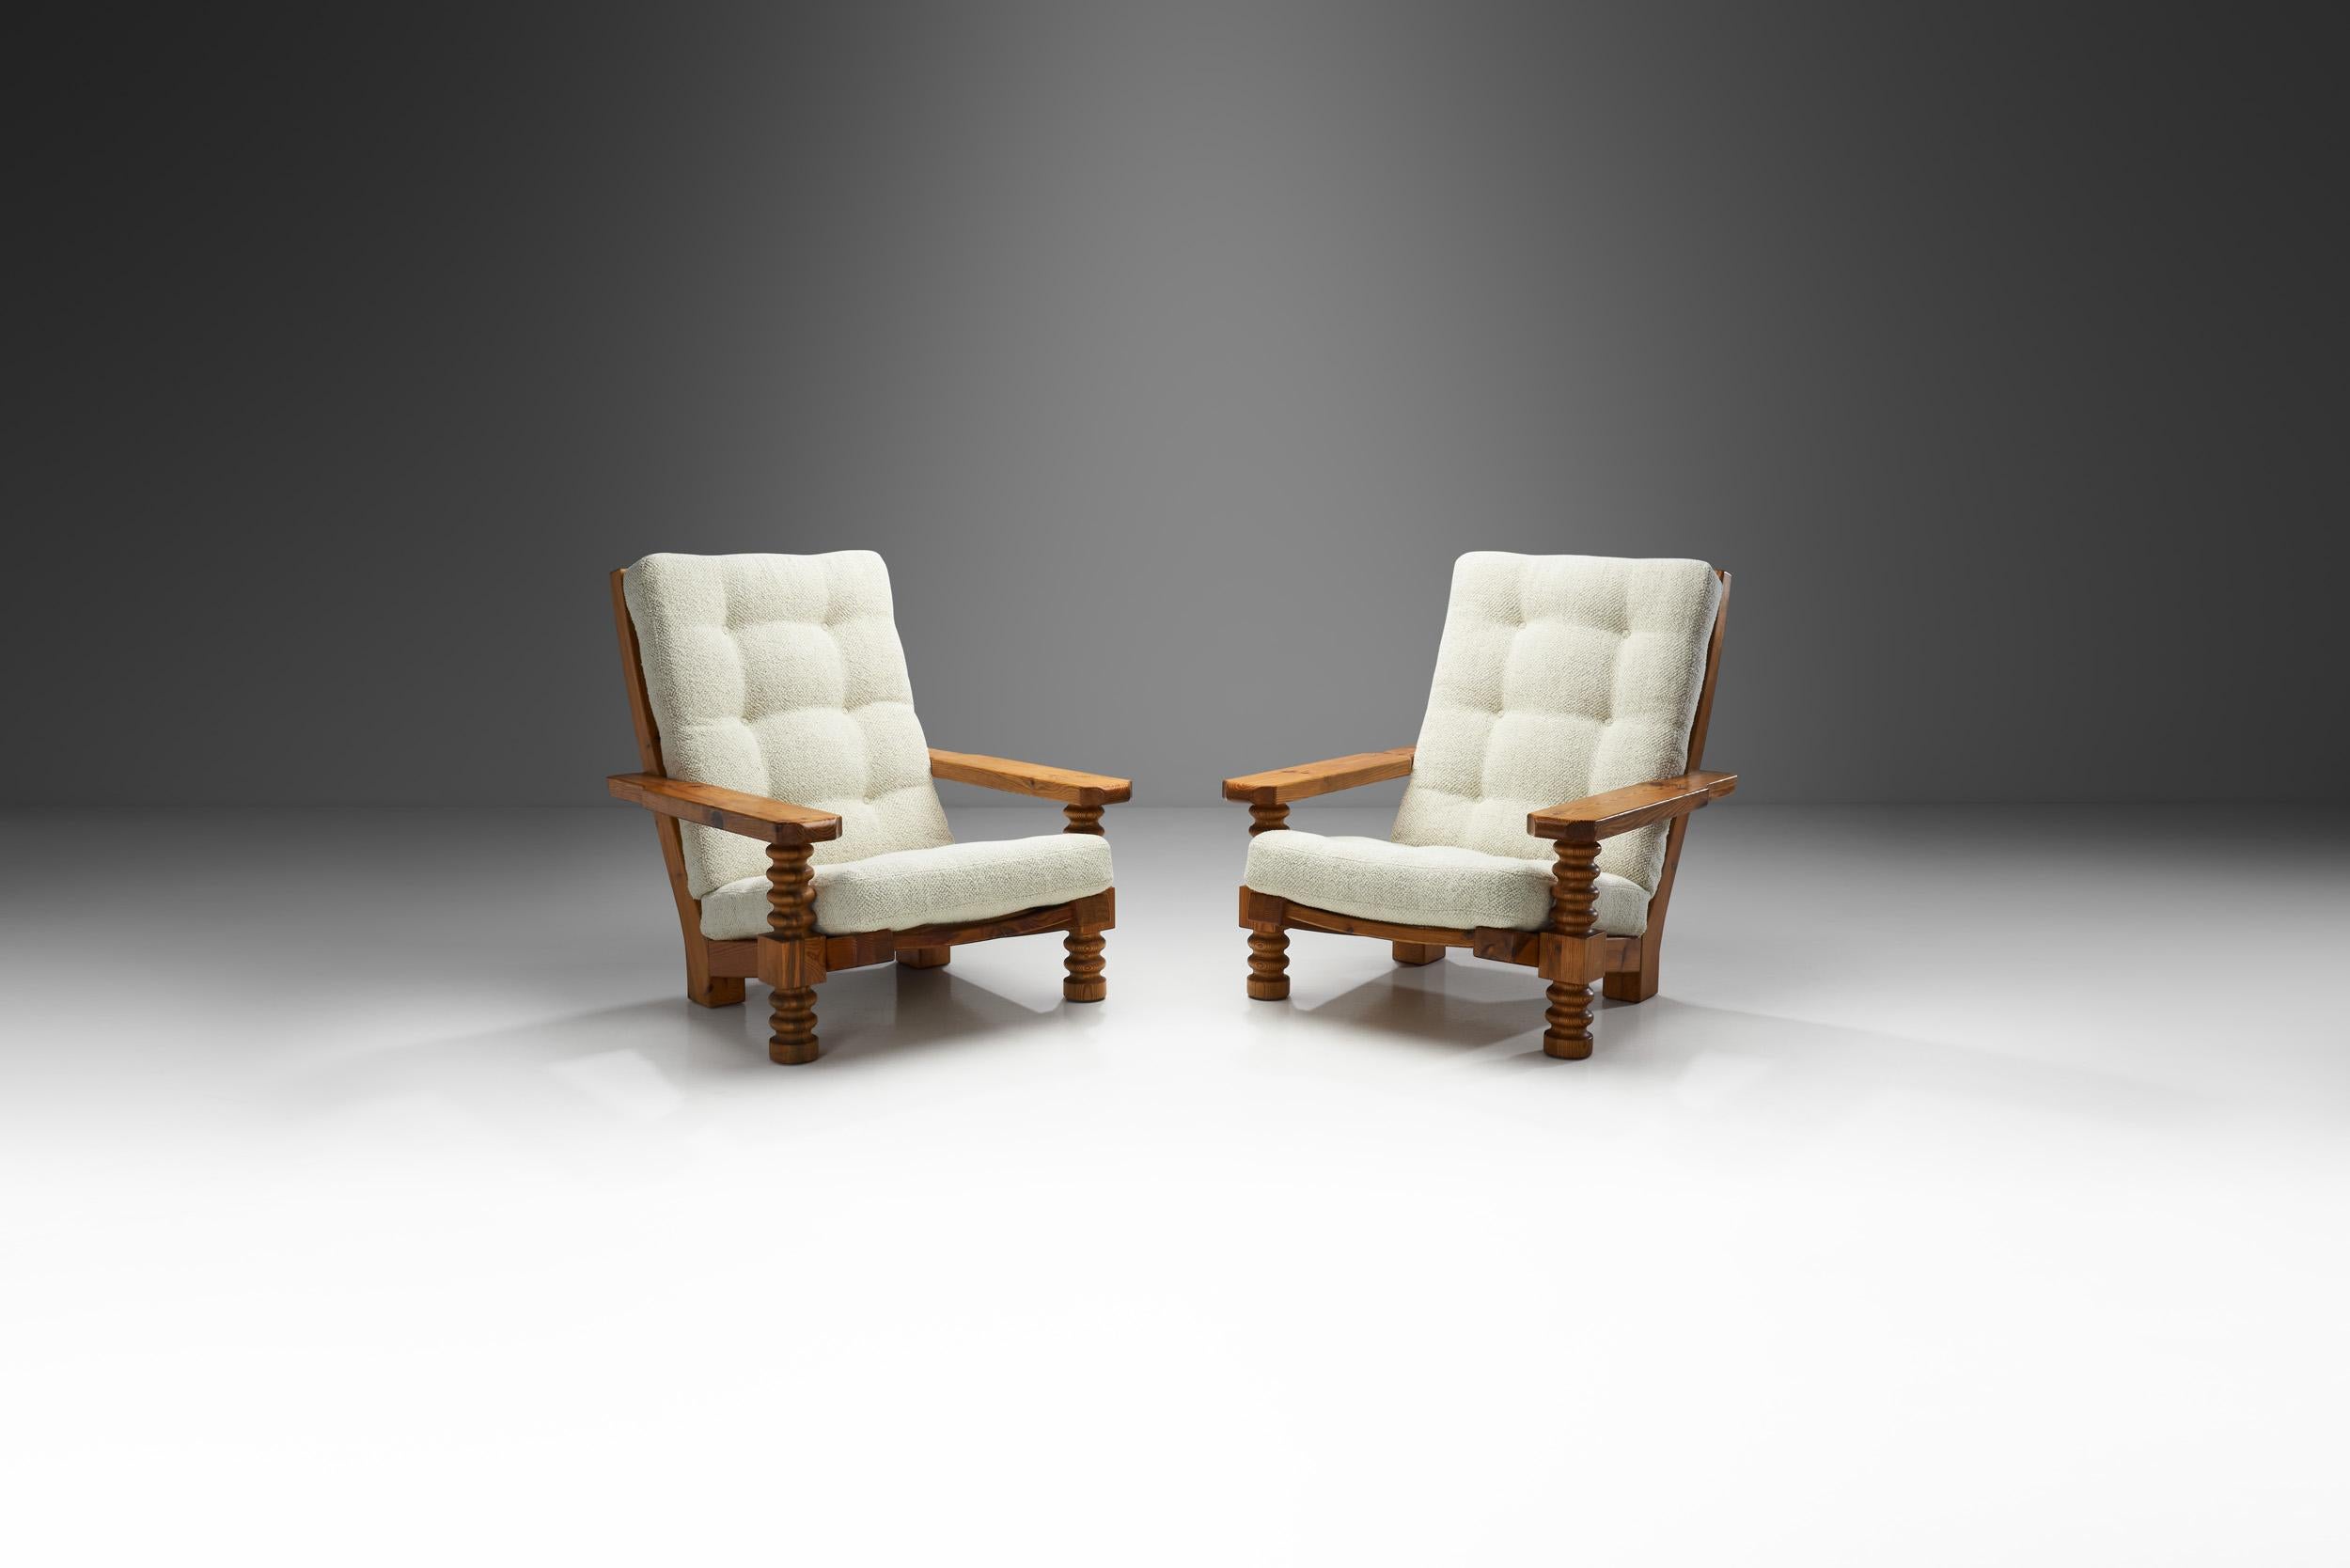 The first golden age of Scandinavian design was from the 1930s through the 1970s. During this period, 20th century furniture designers from Scandinavia created designs that offered unique twists that would soon become prized for their innovative